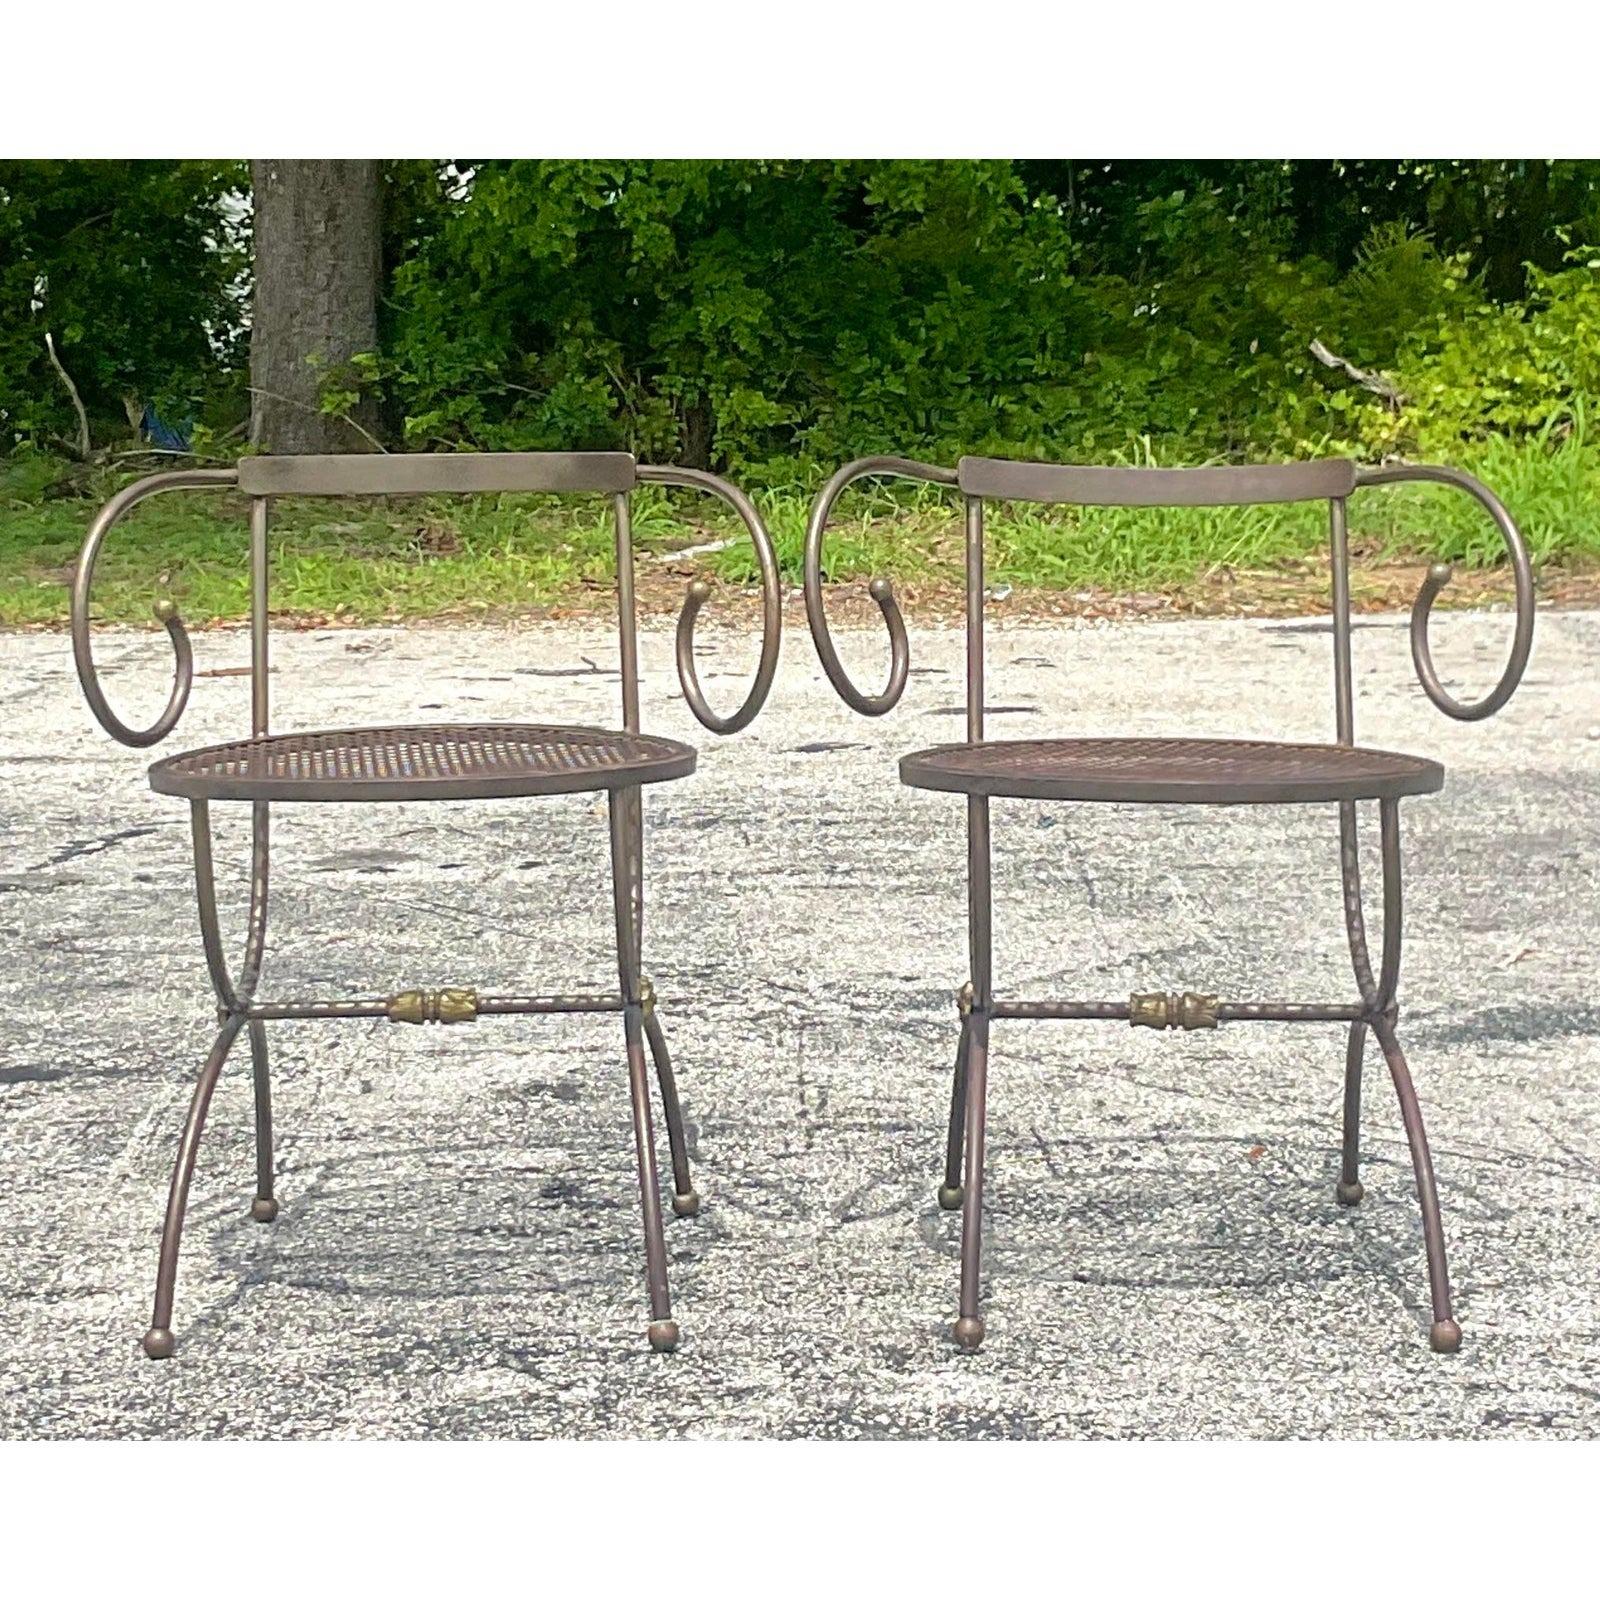 North American Vintage Boho Swirl Wrought Iron Accent Chairs - a Pair For Sale